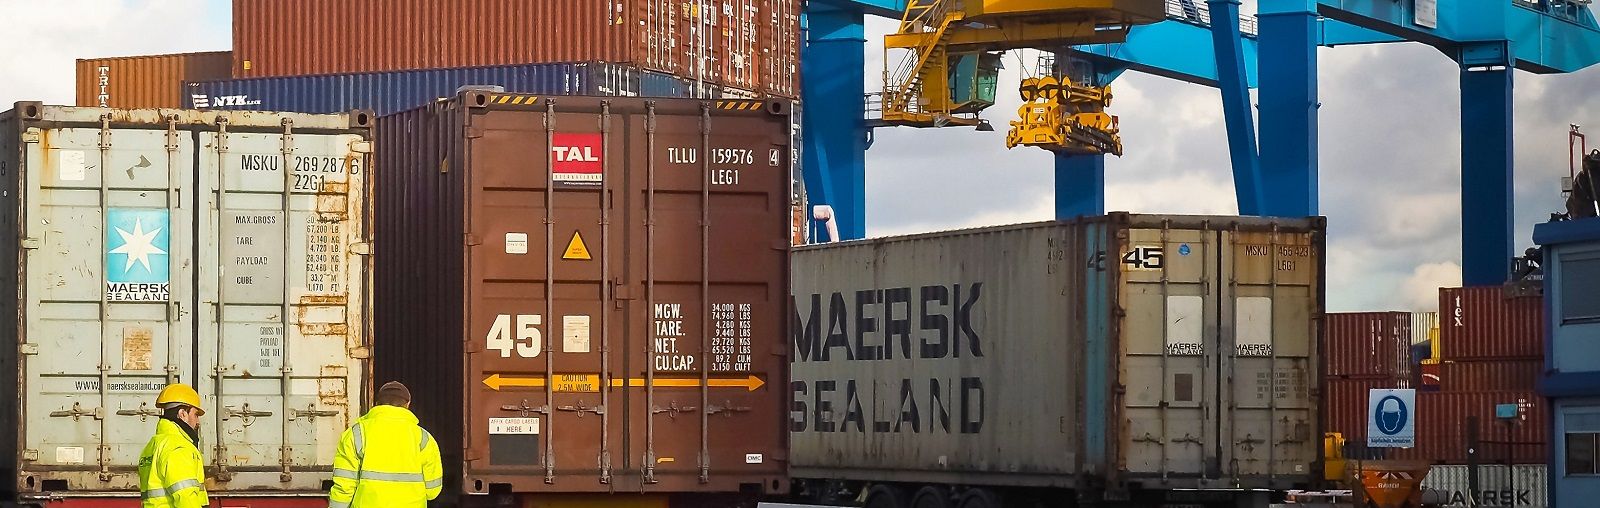 Shipping port with trucks and containers | Learn Questions to Ask Your International Moving Company from AW Transportation